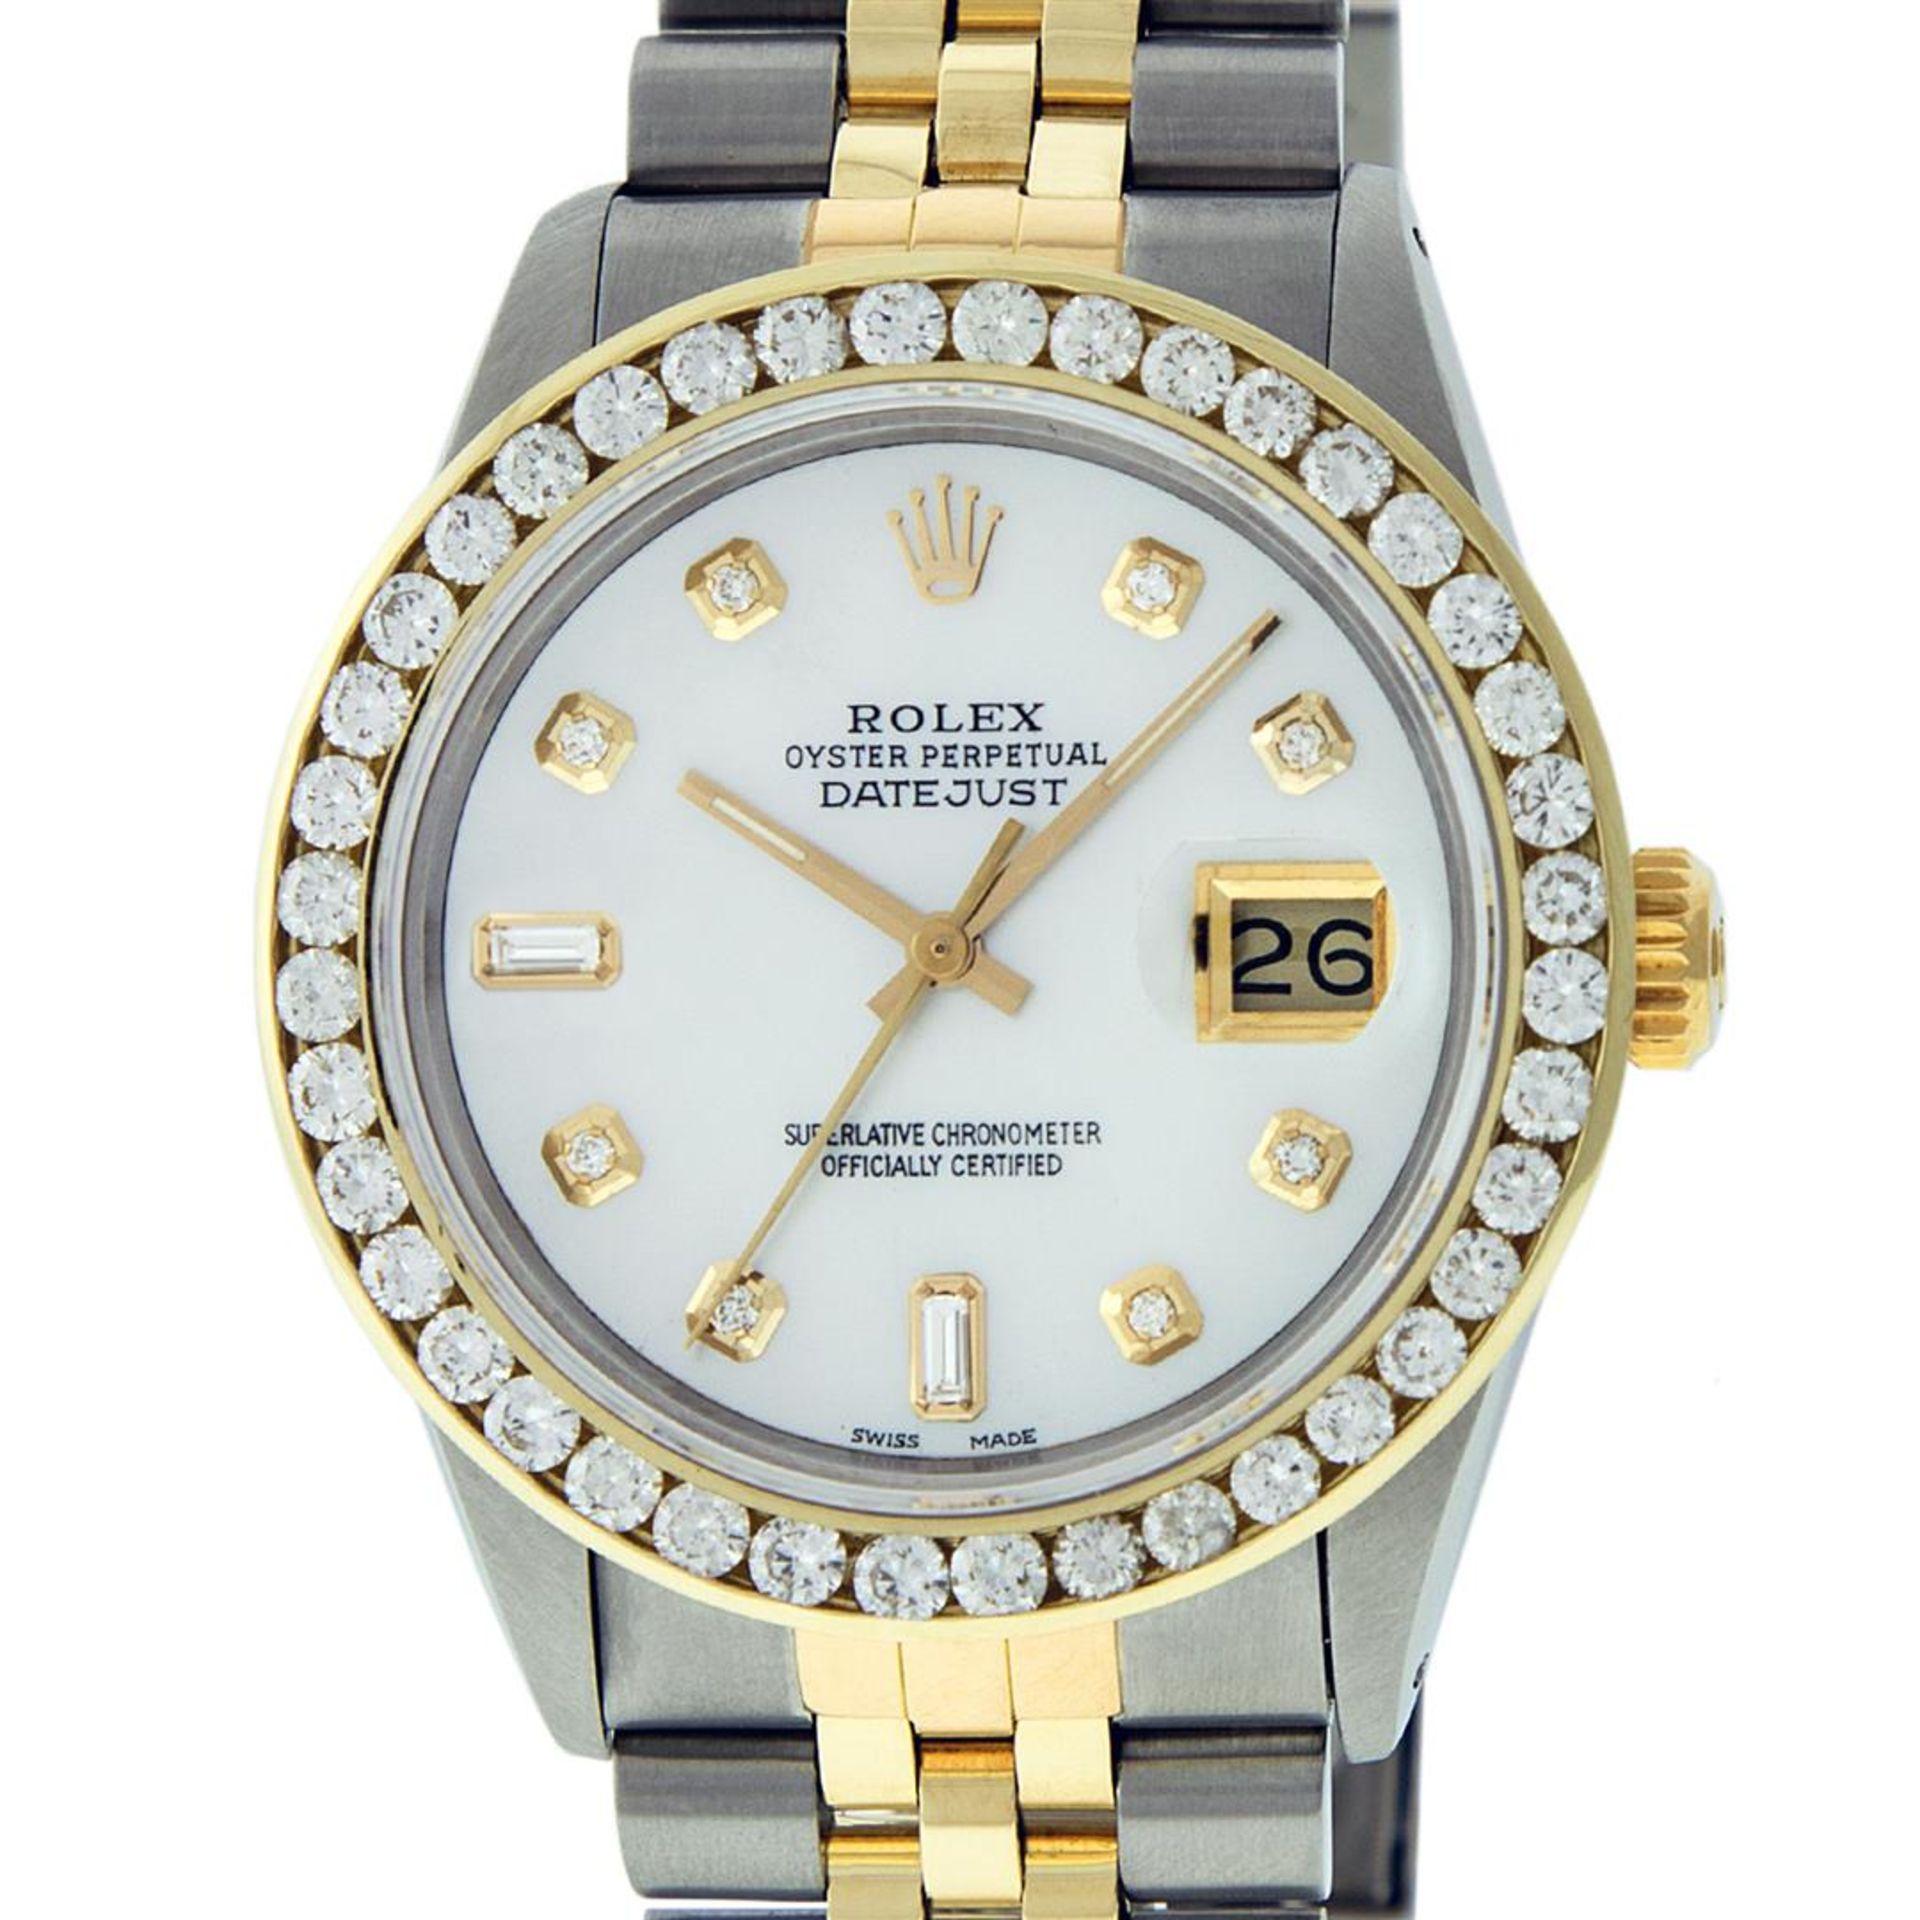 Rolex Mens 2 Tone Mother Of Pearl 3ctw Channel Set Diamond Datejust Wristwatch - Image 2 of 9